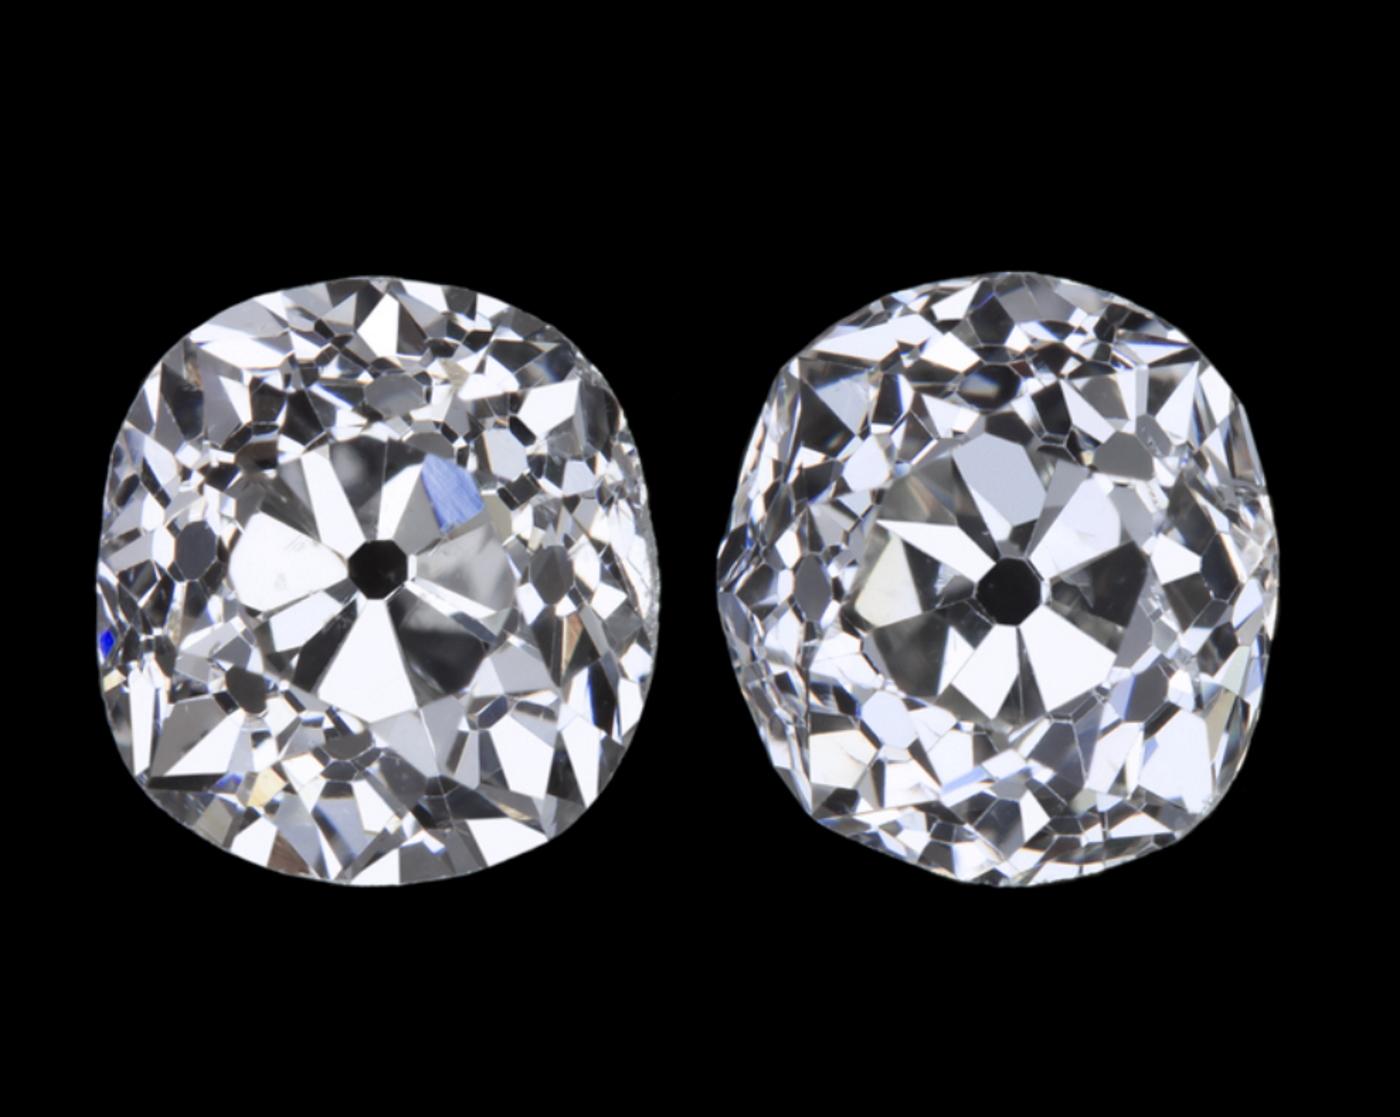 Something extraordinary a pair of GIA certified D E Color si1 si2 clarity 

This gorgeous and rare 2 carat antique matched pair of old mine cut diamonds is bright white, eye clean, full of old world charm, and dazzling with phenomenal sparkle! Cut